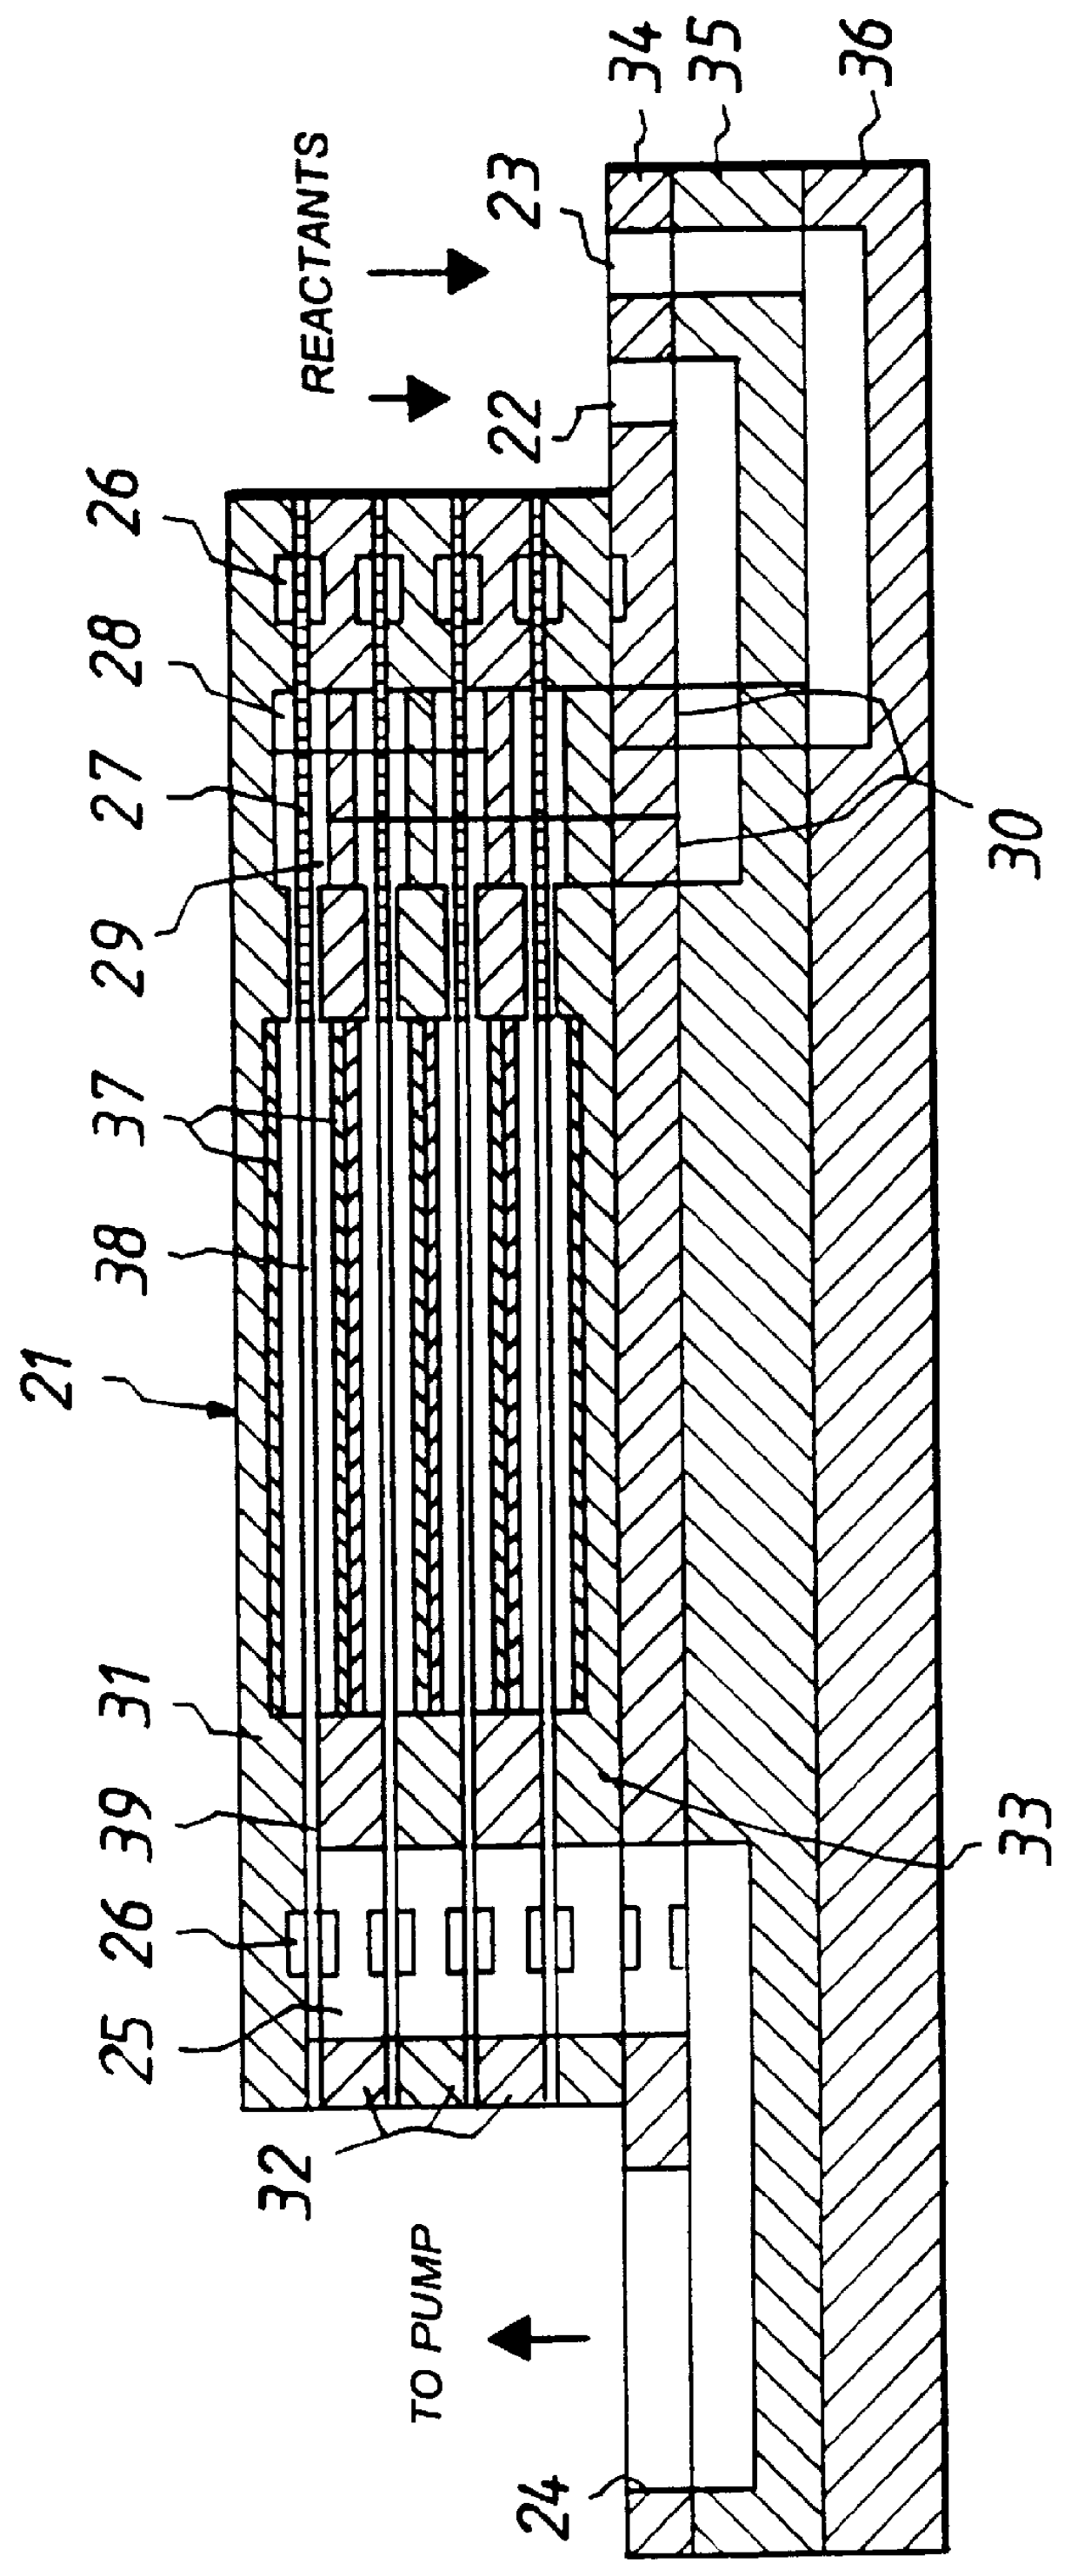 Method for growing thin films